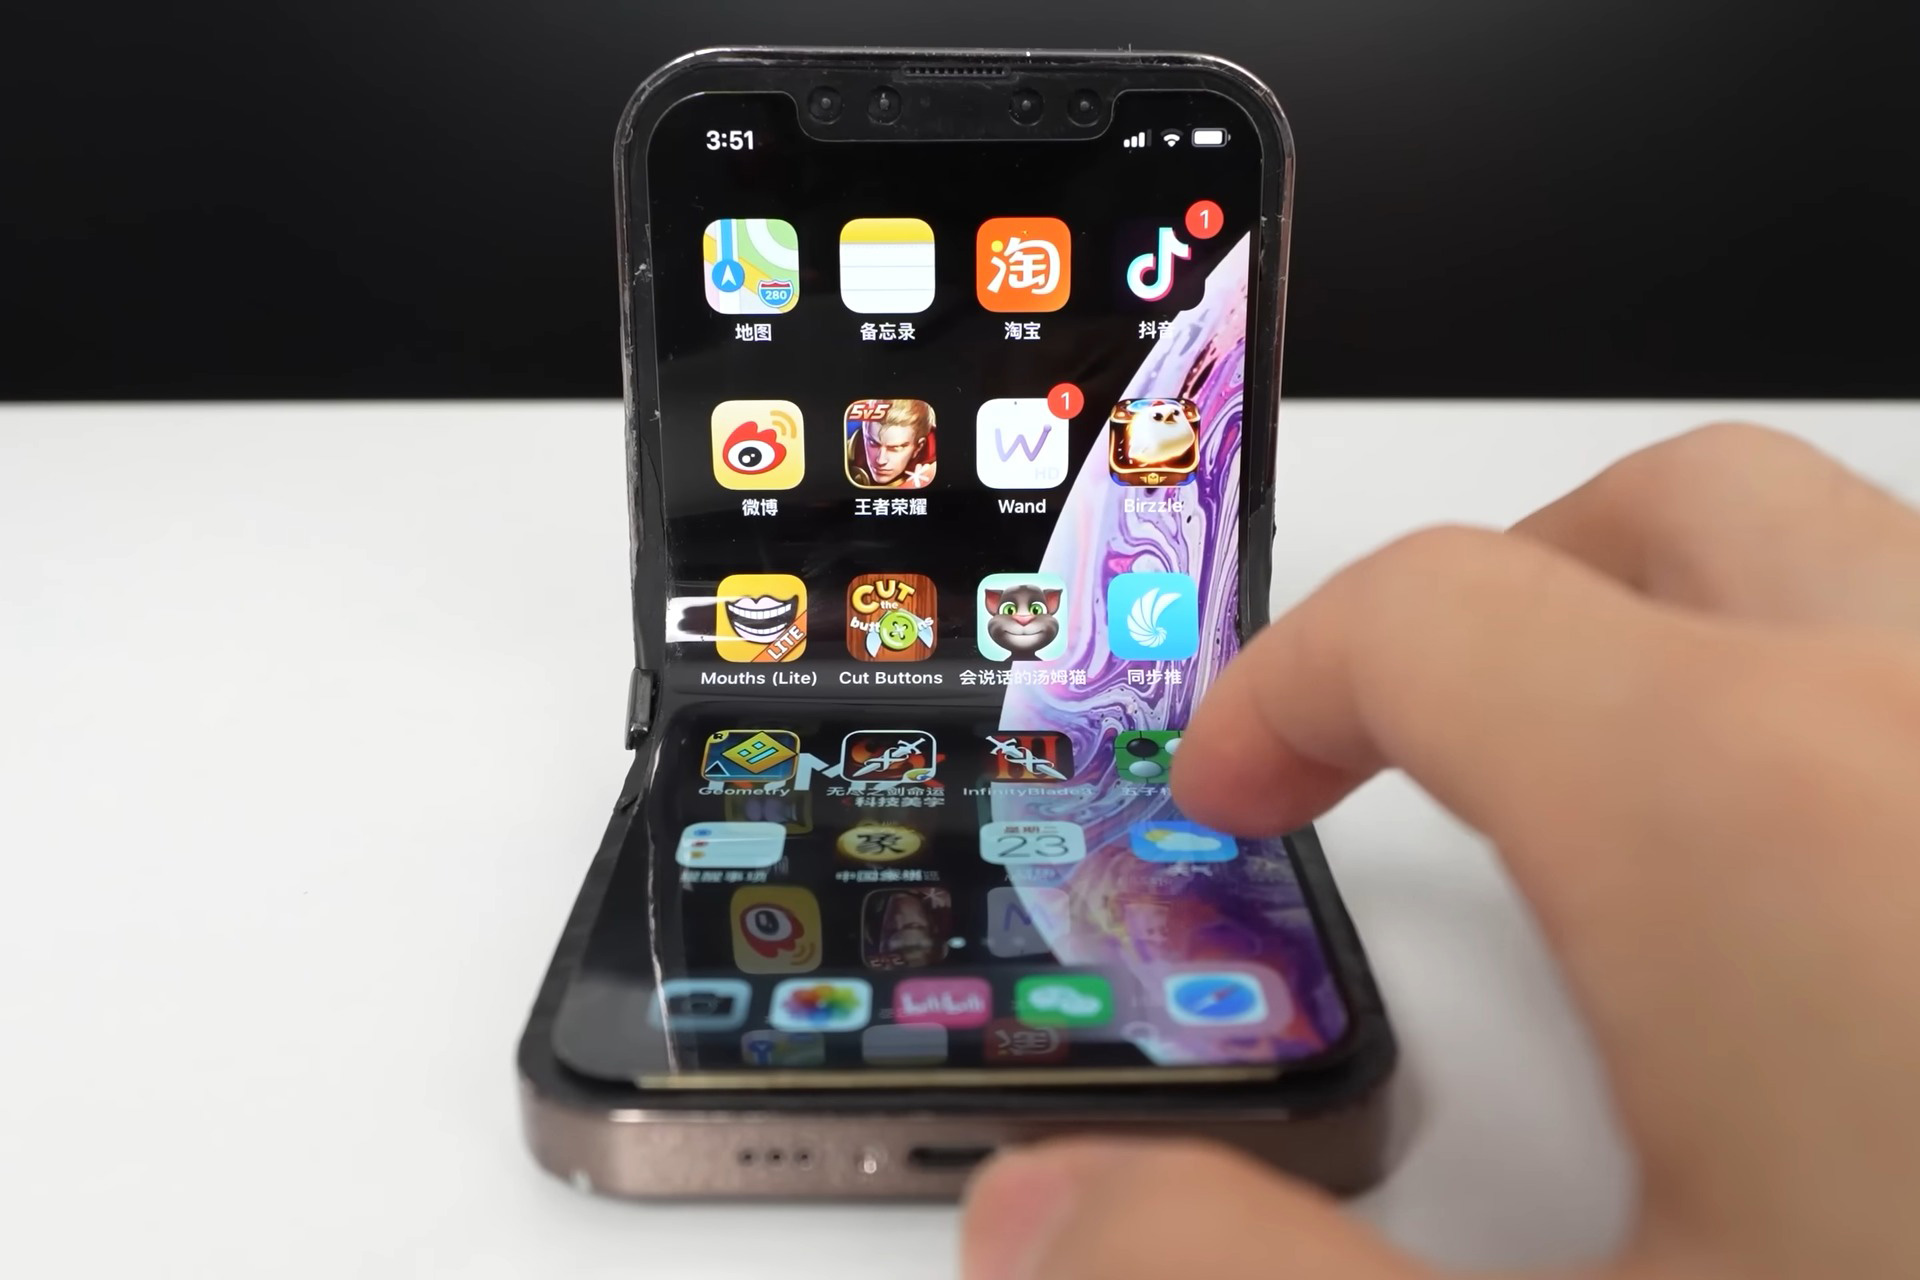 Modders thought it would be fun to make a folding iPhone